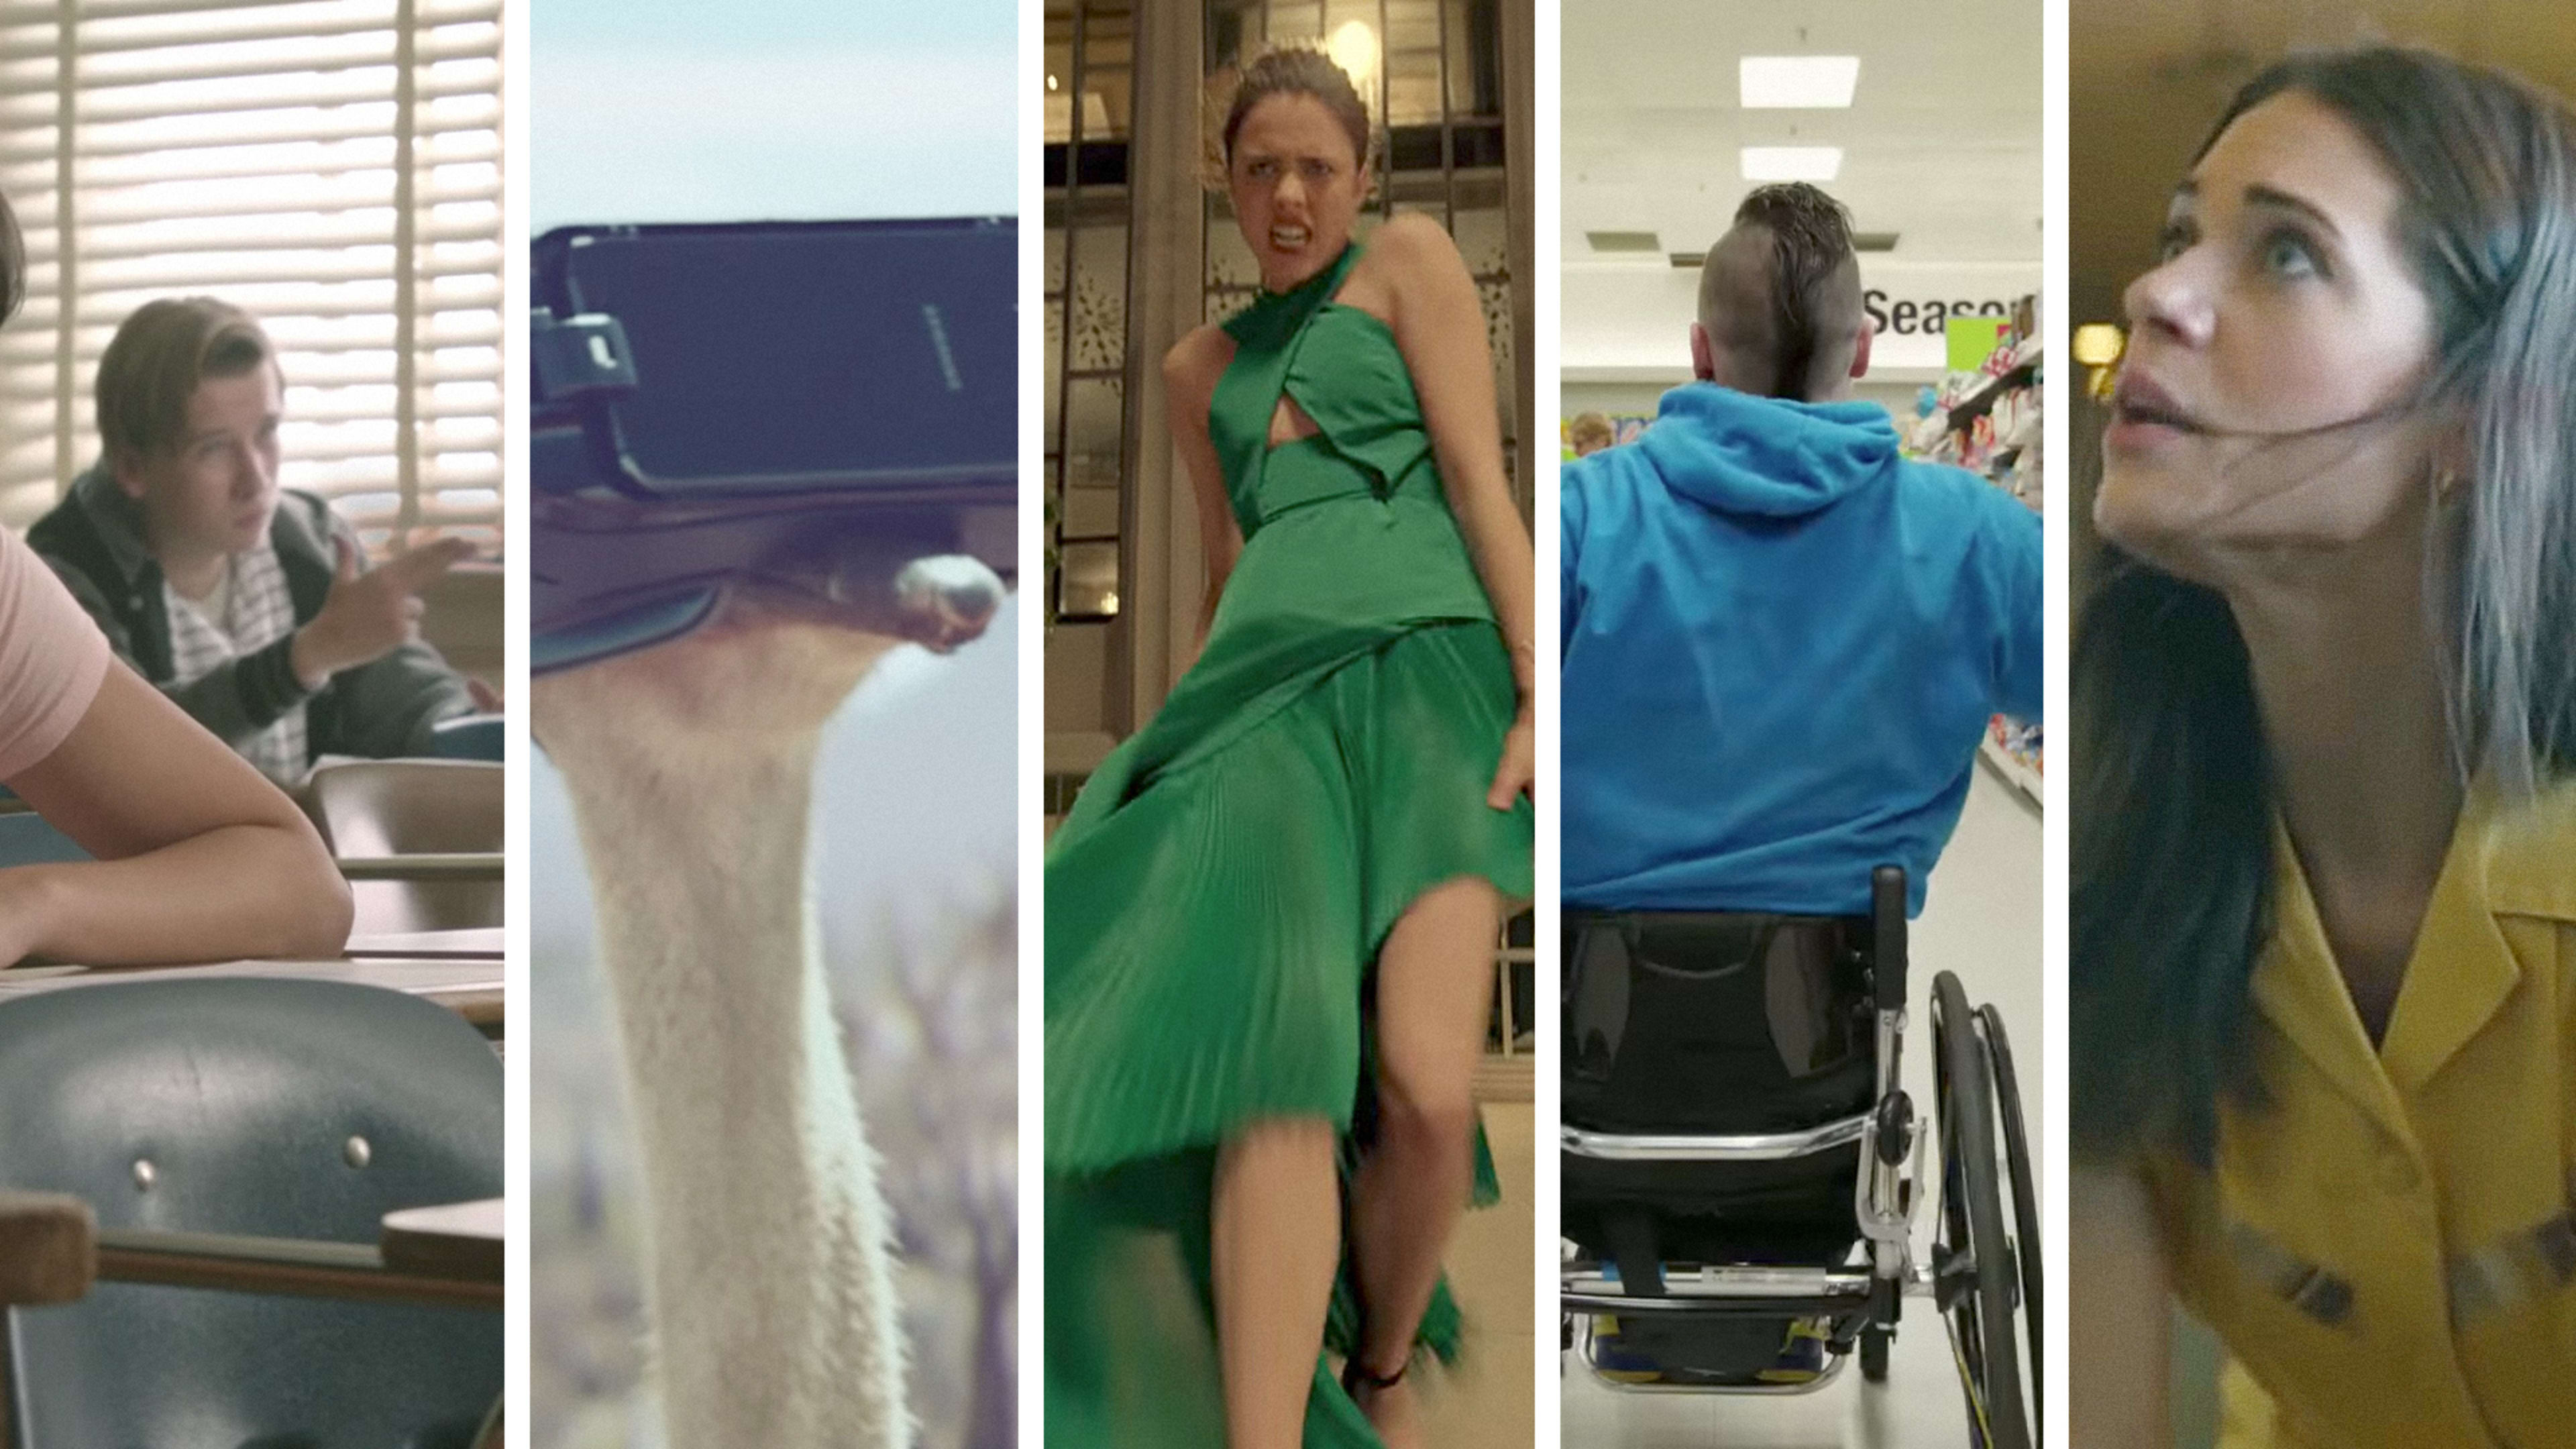 The Top 5 Ads Of The Week: Cannes Preview Edition